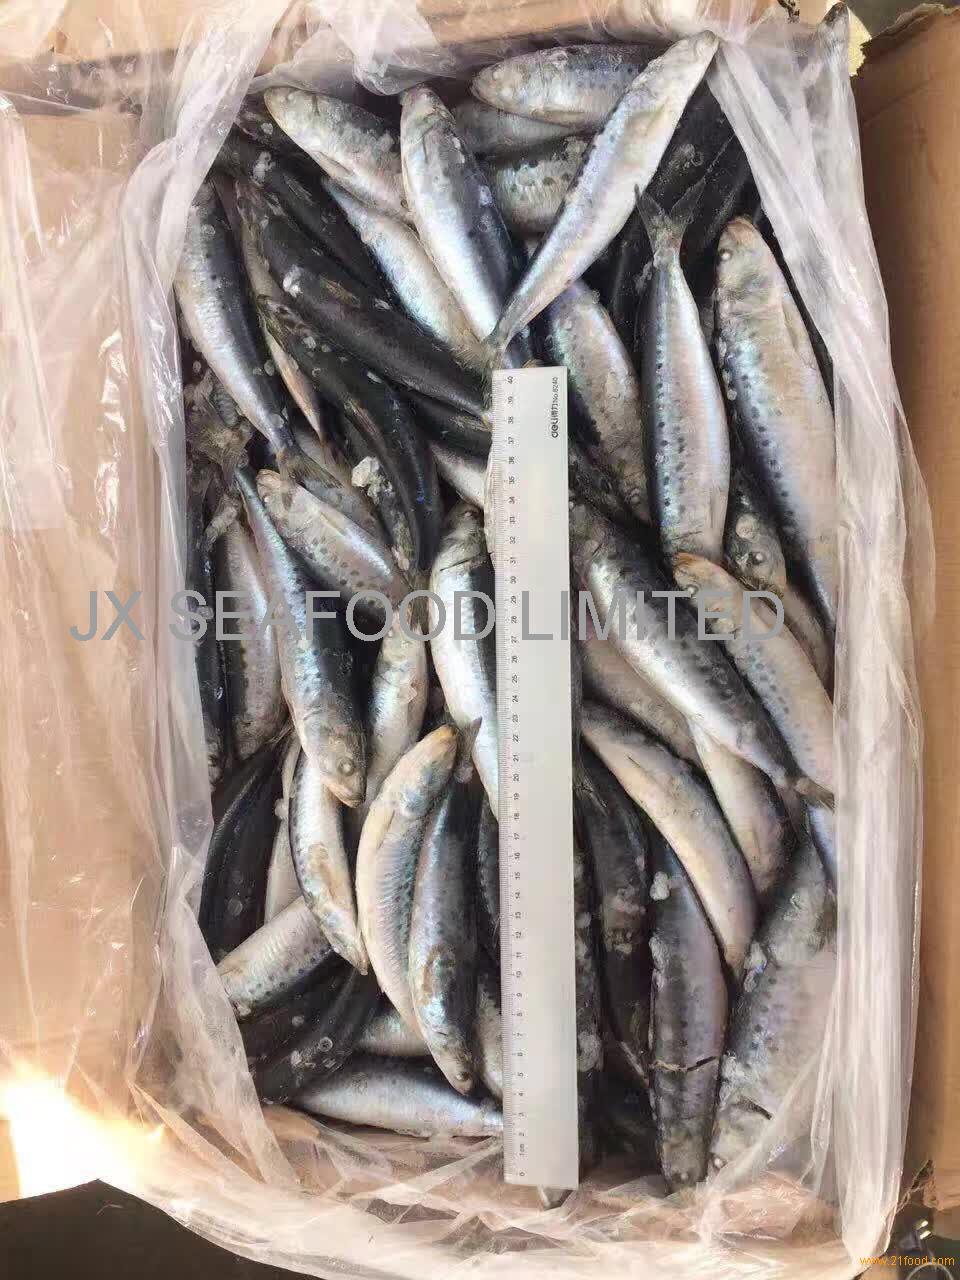 frozen pilchards as bait for fishing,China JX price supplier - 21food